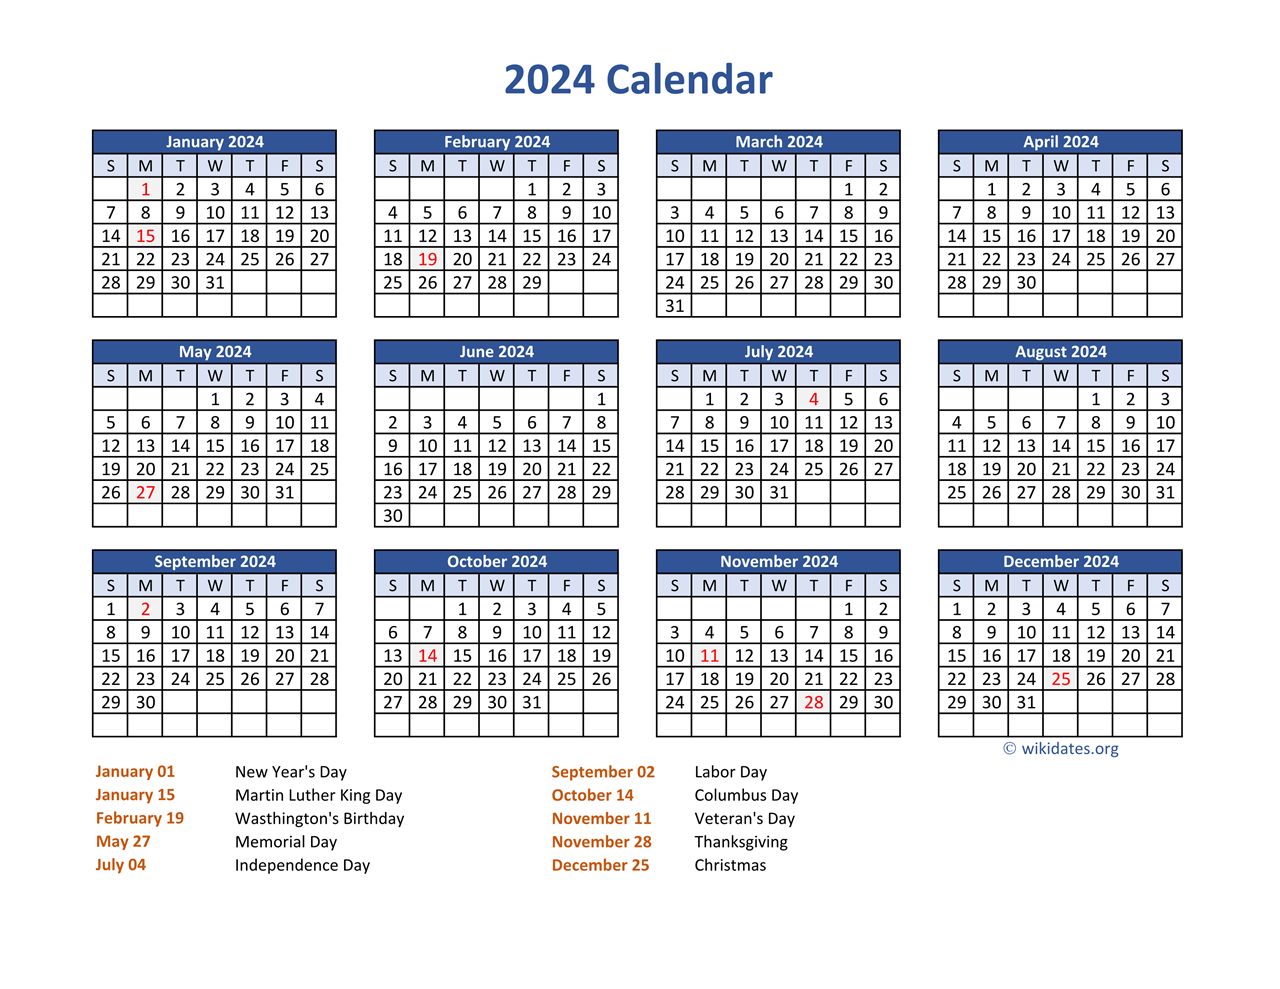 Pdf Calendar 2024 With Federal Holidays | Wikidates for Free Printable 2024 Calendar With Holidays Us